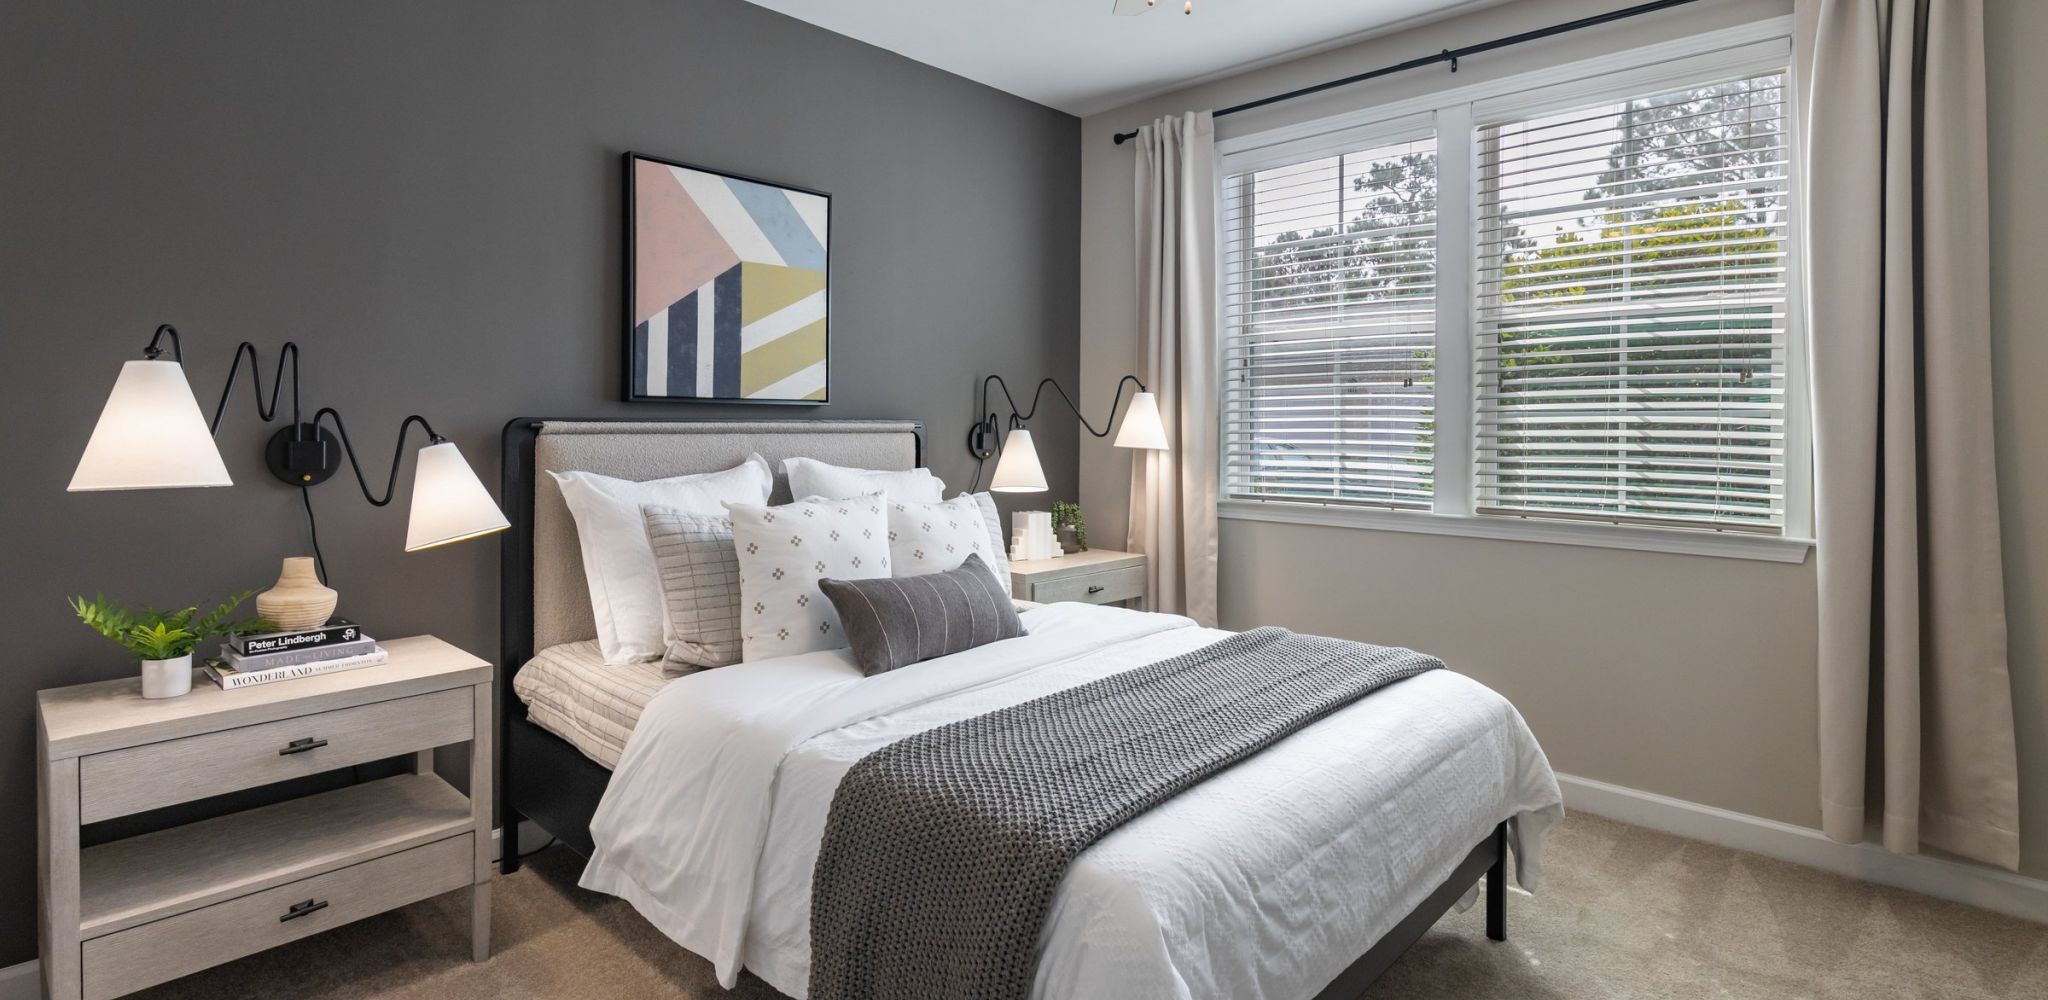 Comfortably appointed bedroom with modern geometric art above the bed at Hawthorne at Stillwater, embodying serene apartment living in Sneads Ferry, NC.